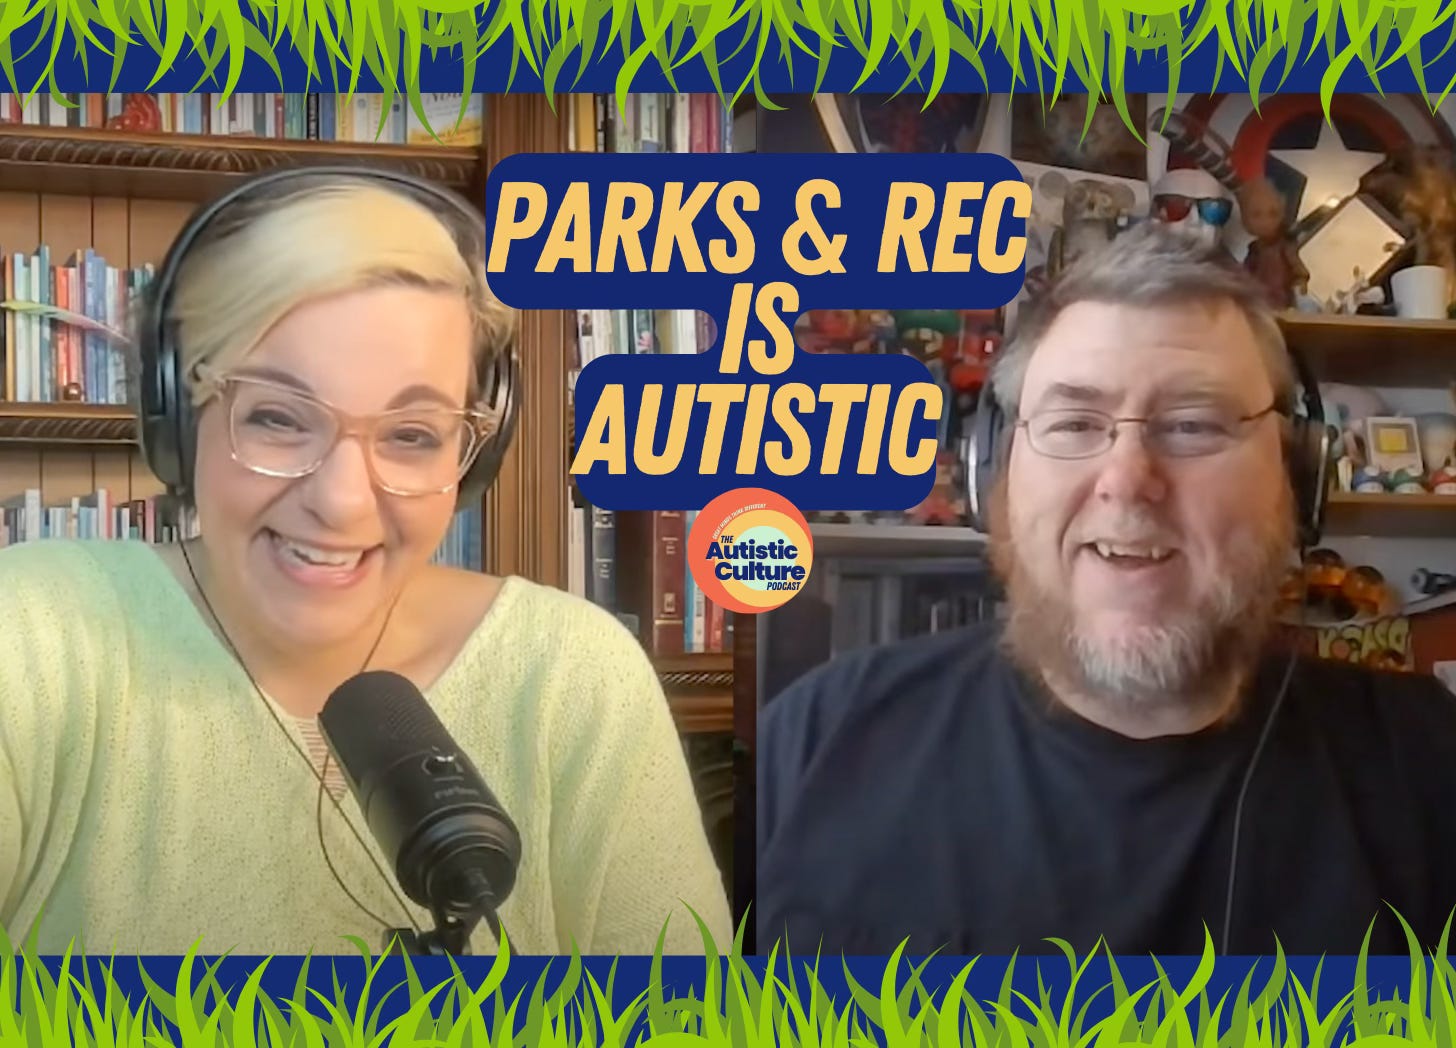 Listen to Autistic Podcast hosts discuss the many Autistic characters in Parks and Rec